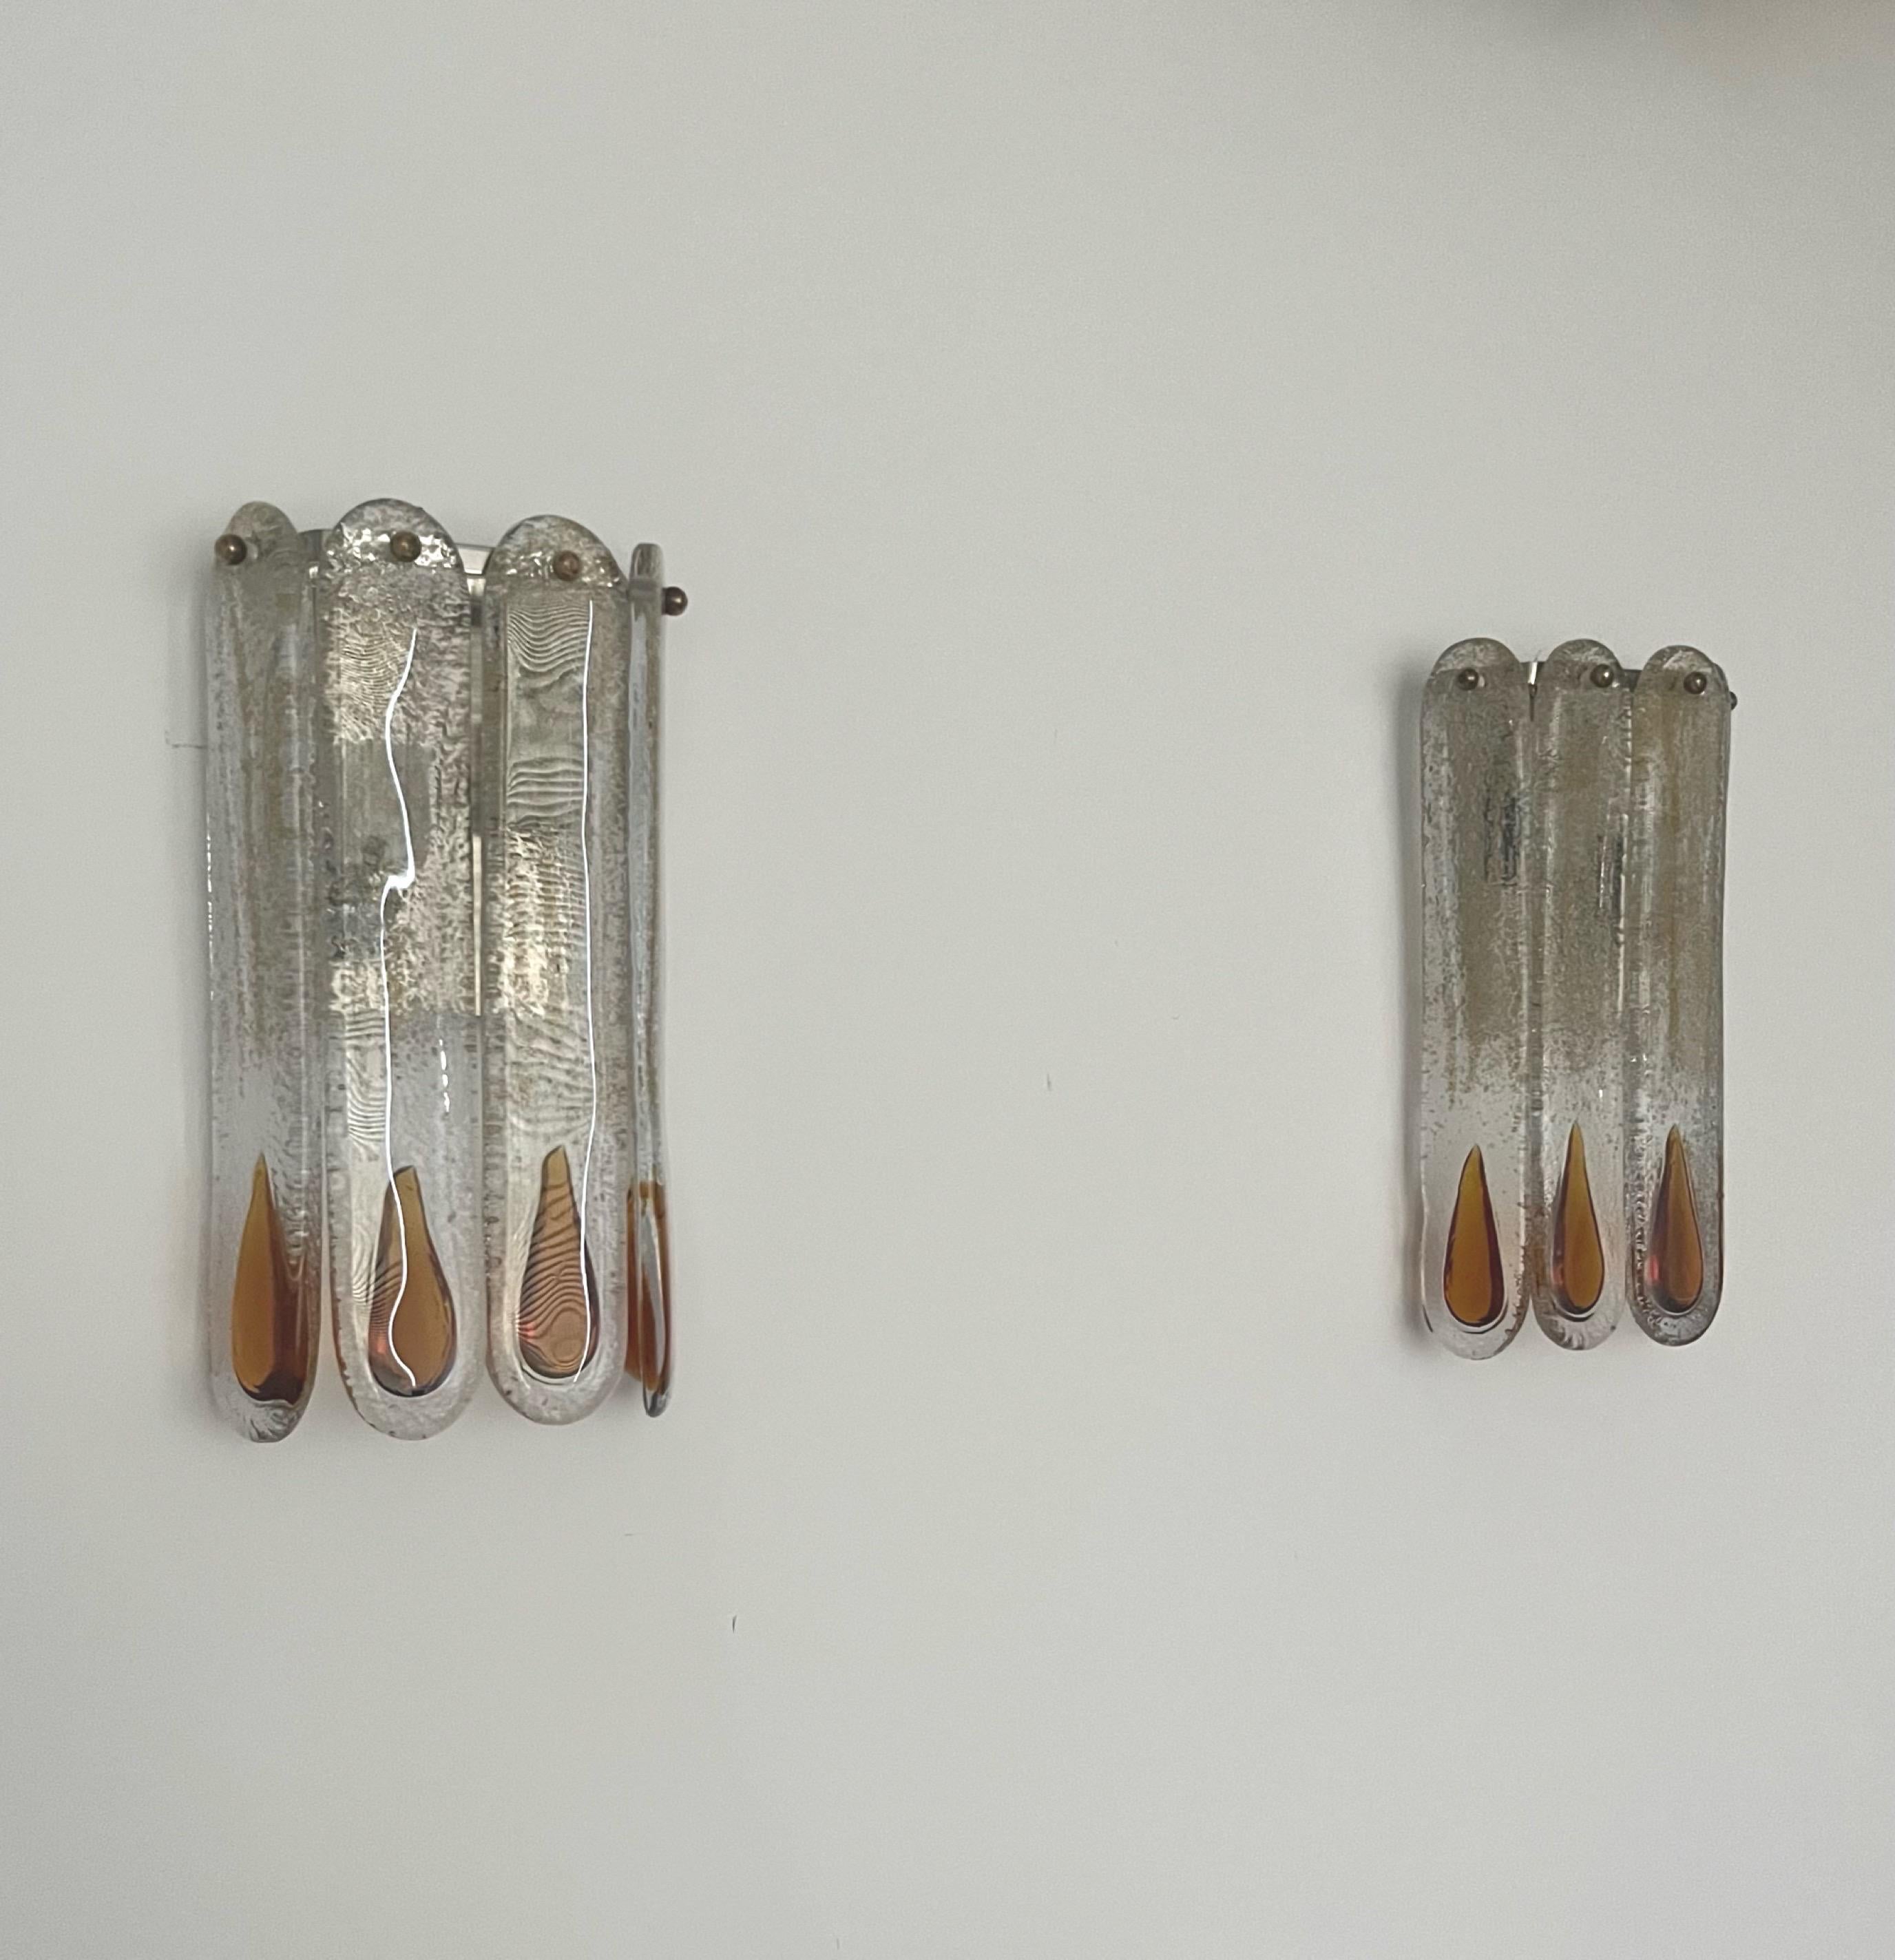 Pair of Midcentury Italian Amber Murano Wall Sconces by Mazzega, 1970s For Sale 2